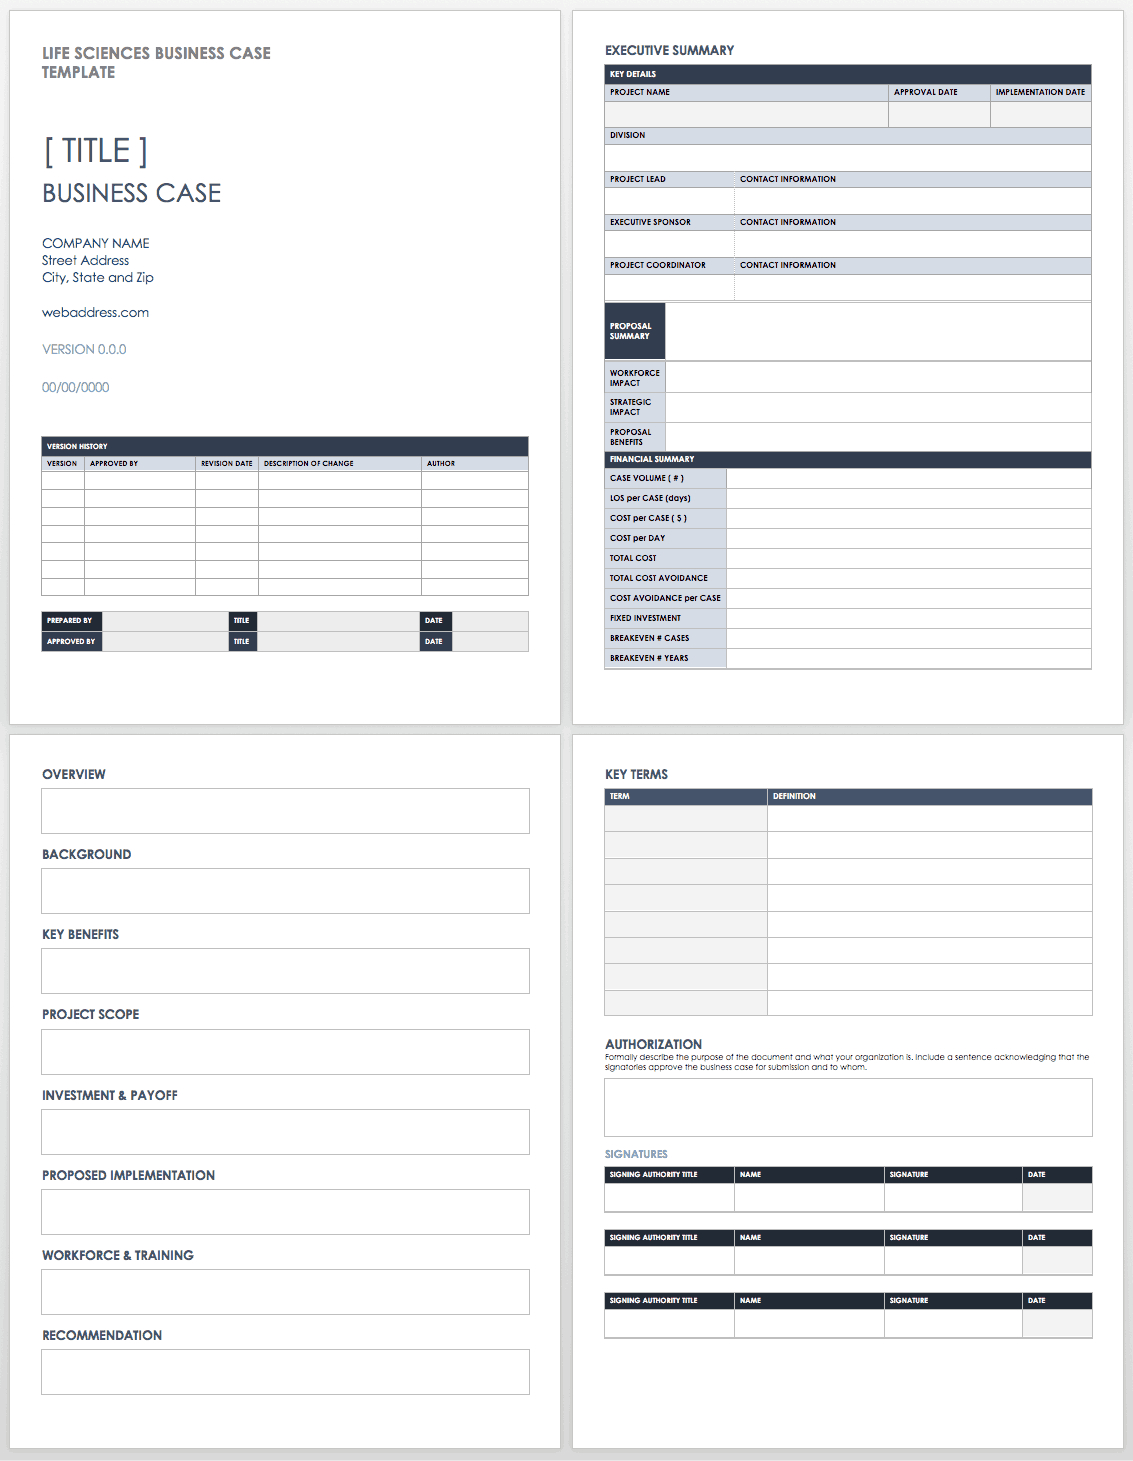 Free Business Case Templates | Smartsheet In How To Create A Business Case Template